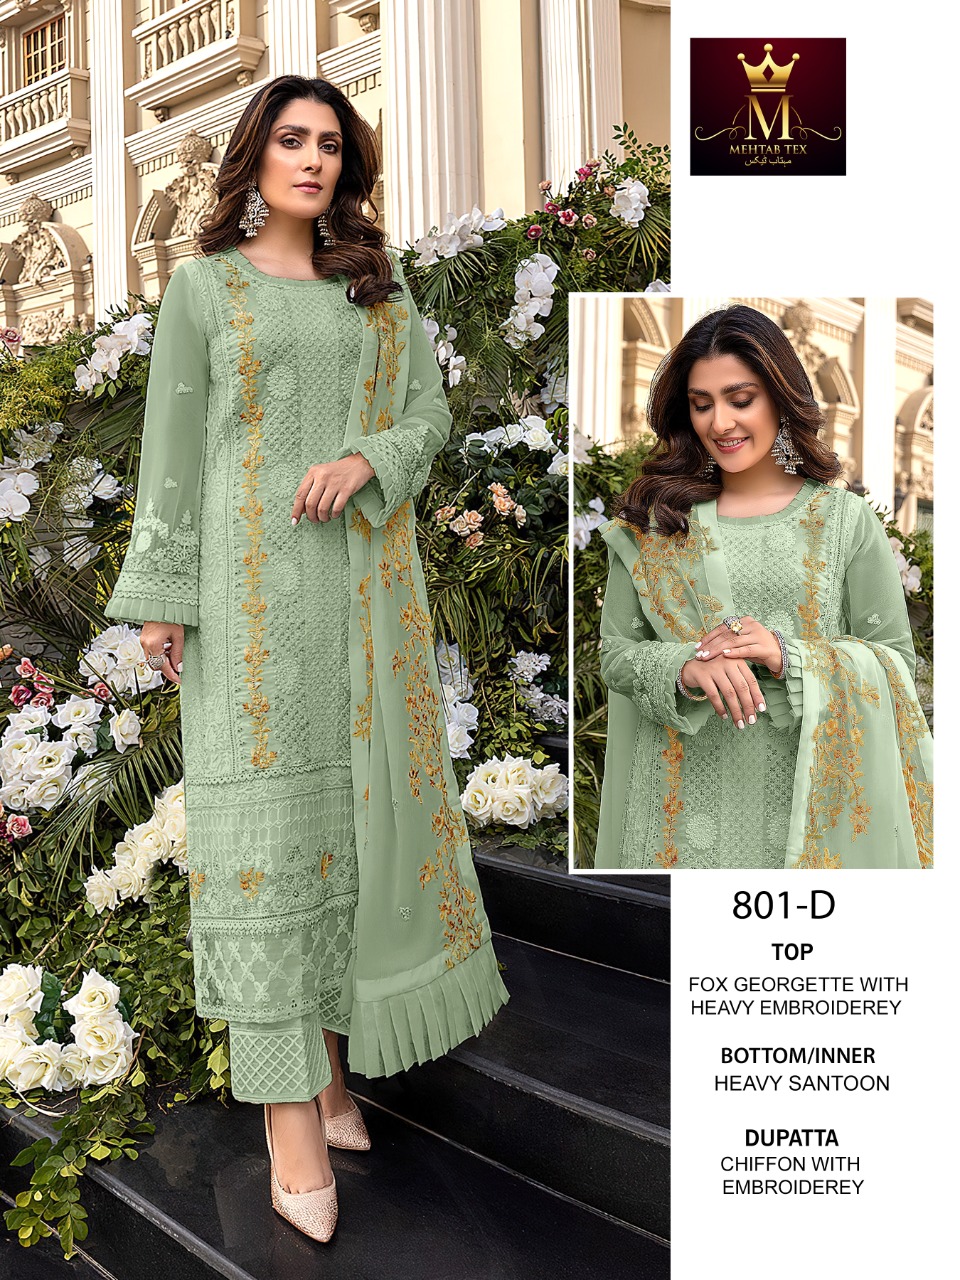 Mehtab Tex Hit Collection 801-D